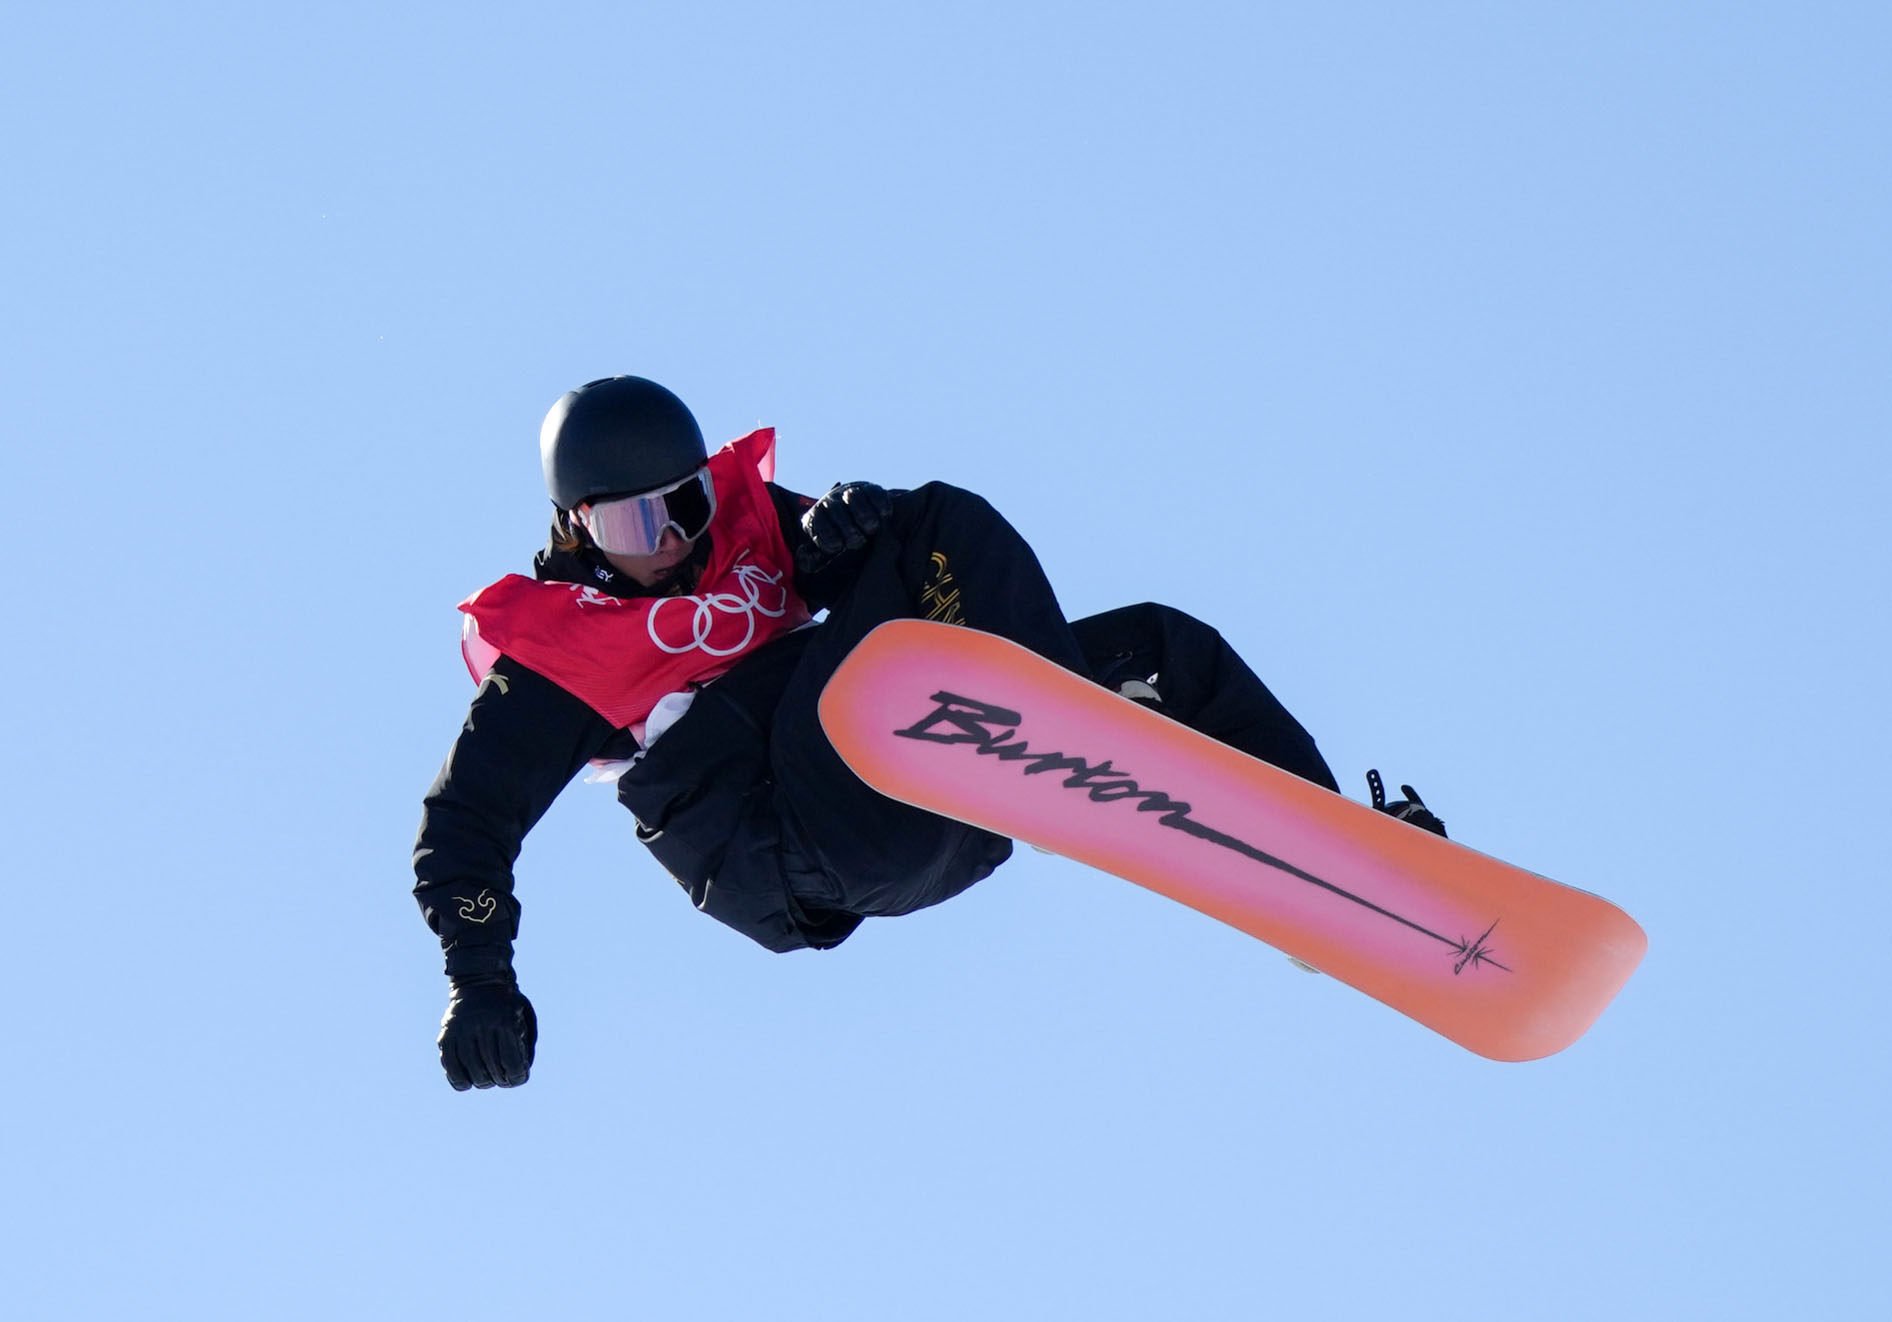 China’s Su Yiming flies through the air in the men’s snowboard slopestyle at the Winter Olympics in Zhangjiakou. Photo: Xinhua